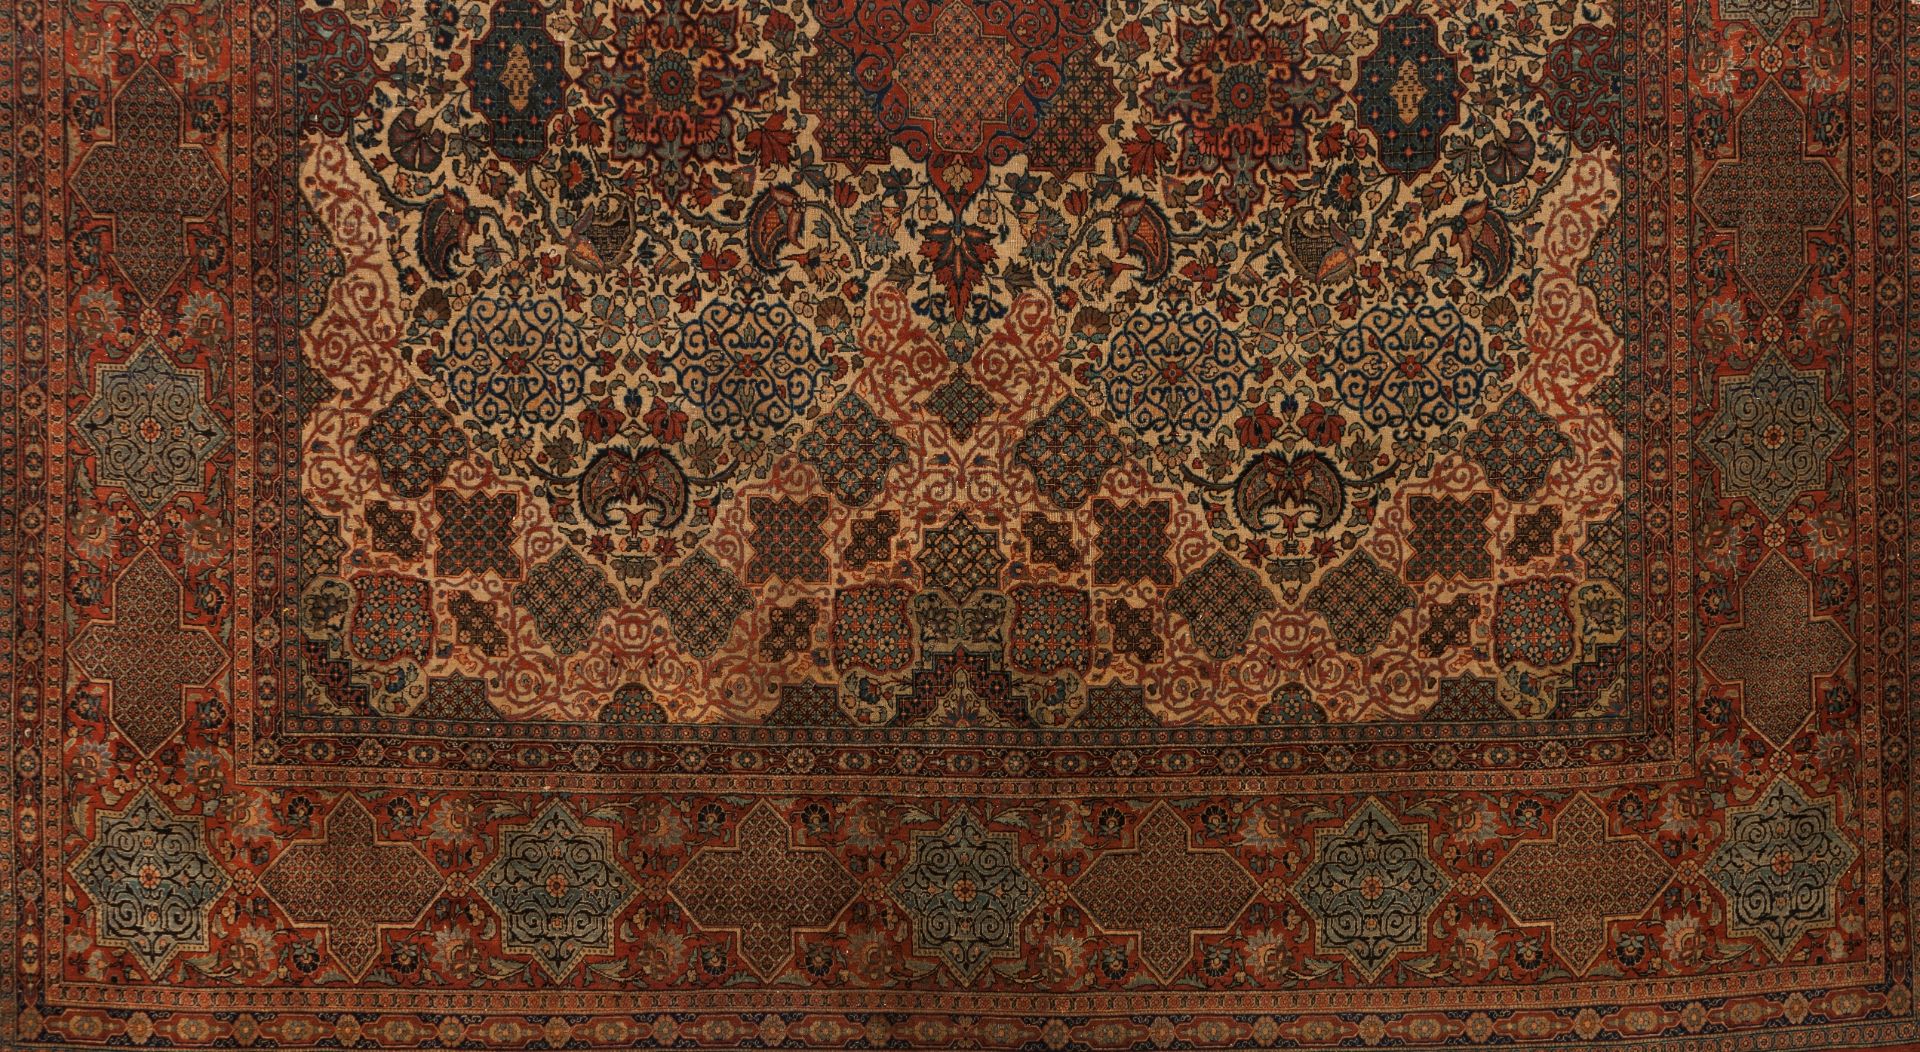 A Shahreza rug, IranWool and cotton Floral pattern of central medallion in red, blue and beige s